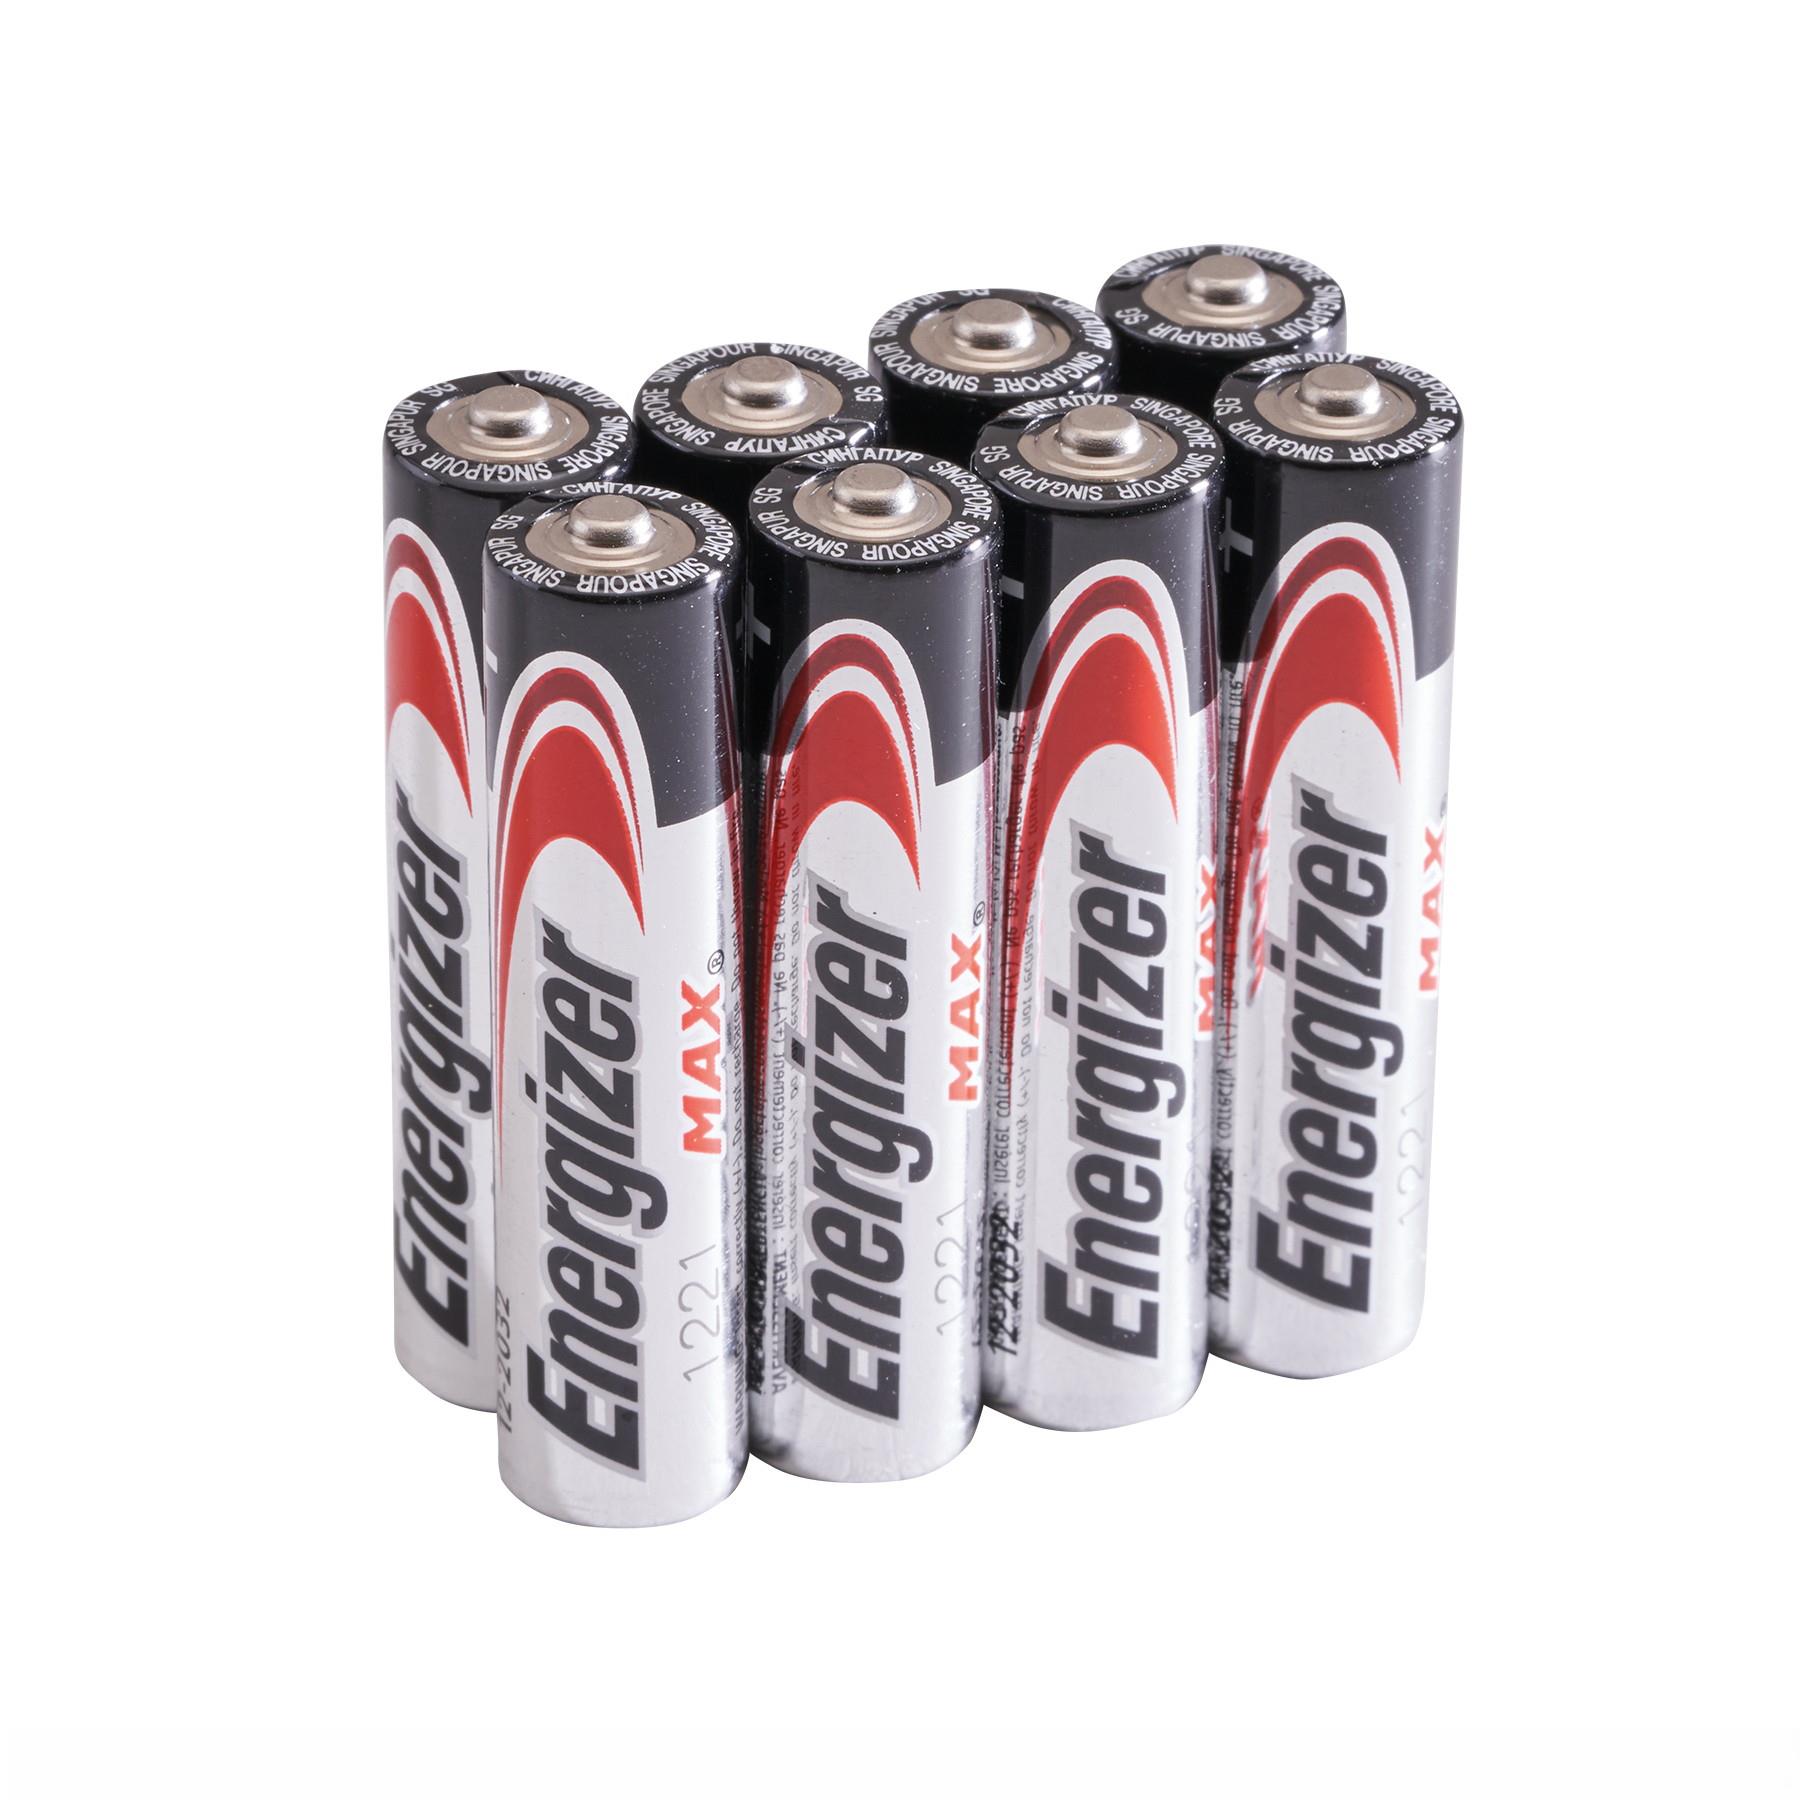 Energizer Max LR03 Battery 'AAA' Cell; Pack (8)